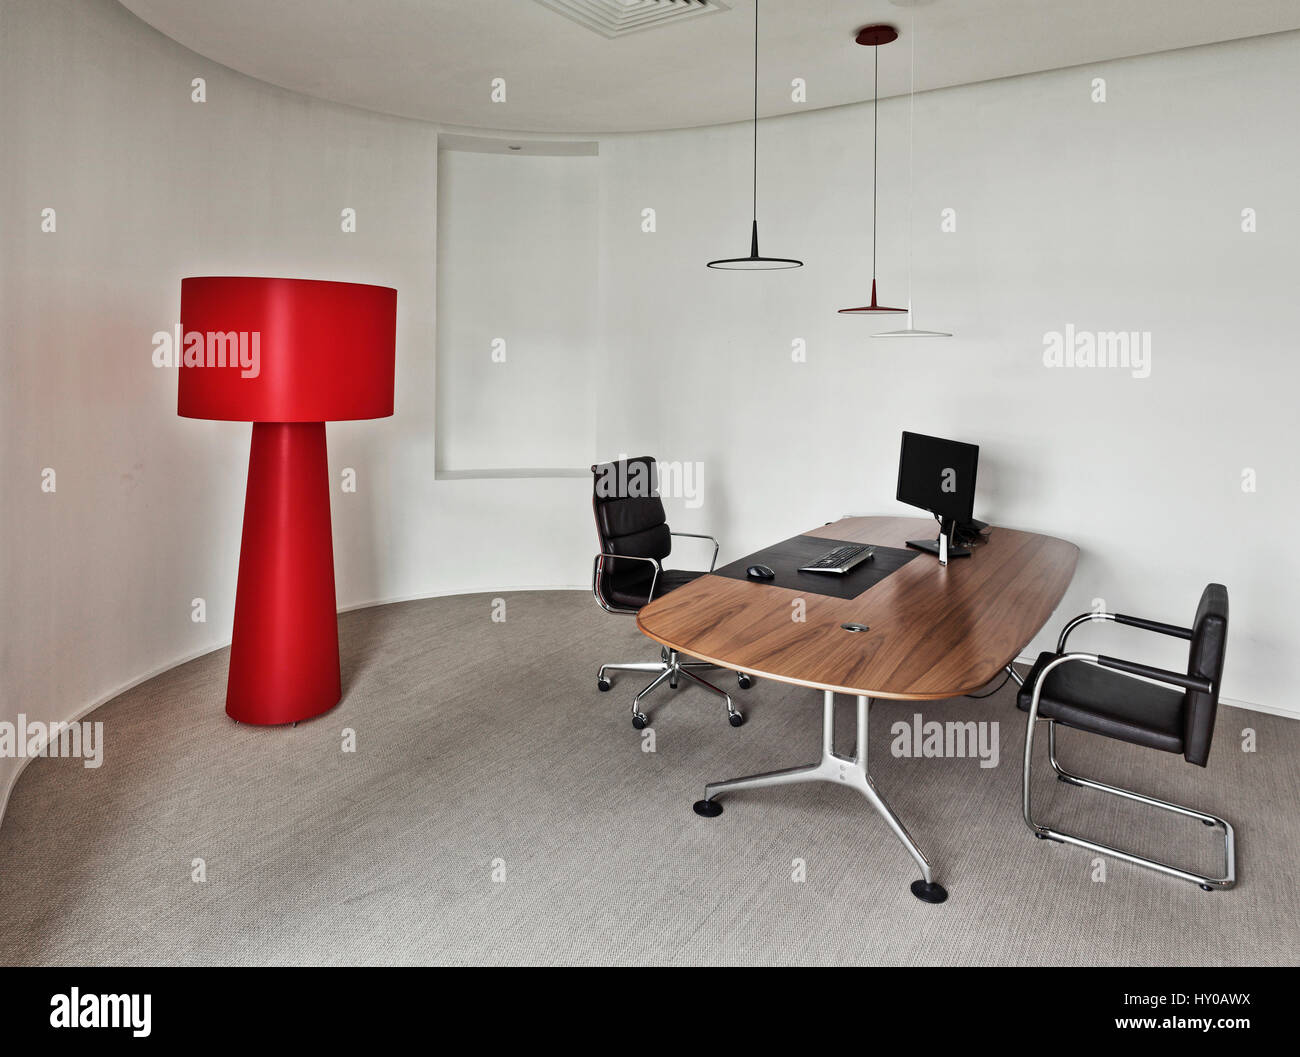 Moscow, interior, office, working, design, decor, modern,workplace, architecture, features, red-white, luxury, working conditions, worklife, Stock Photo